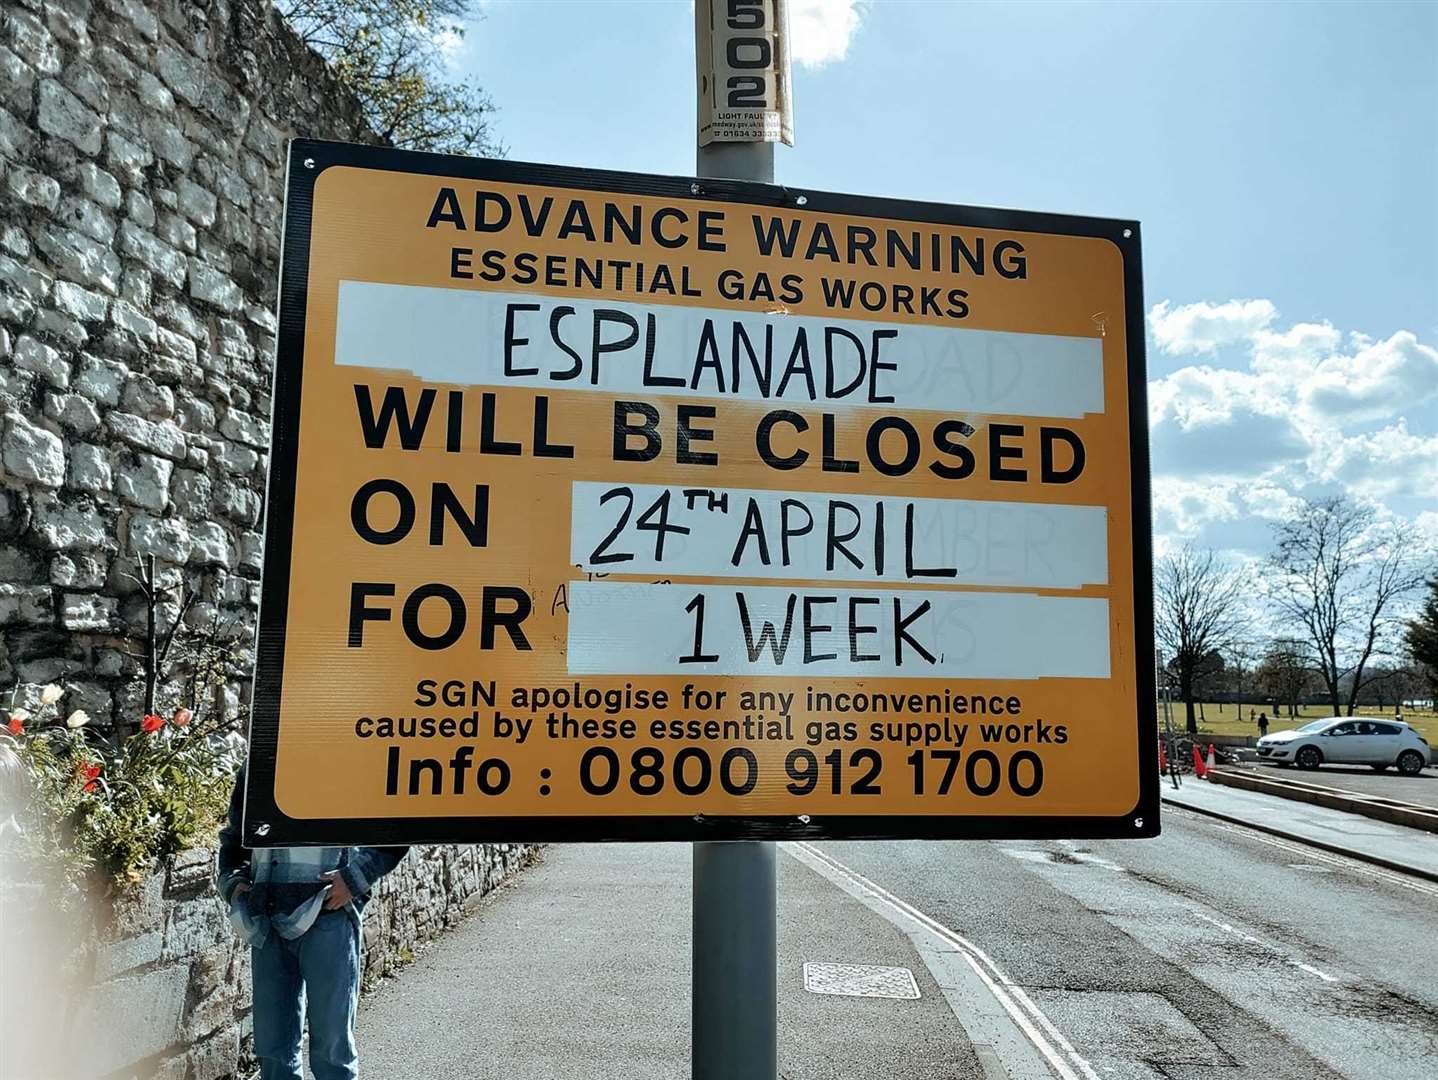 The Esplanade, which runs from Rochester to Borstal, is due to be shut to traffic for seven days